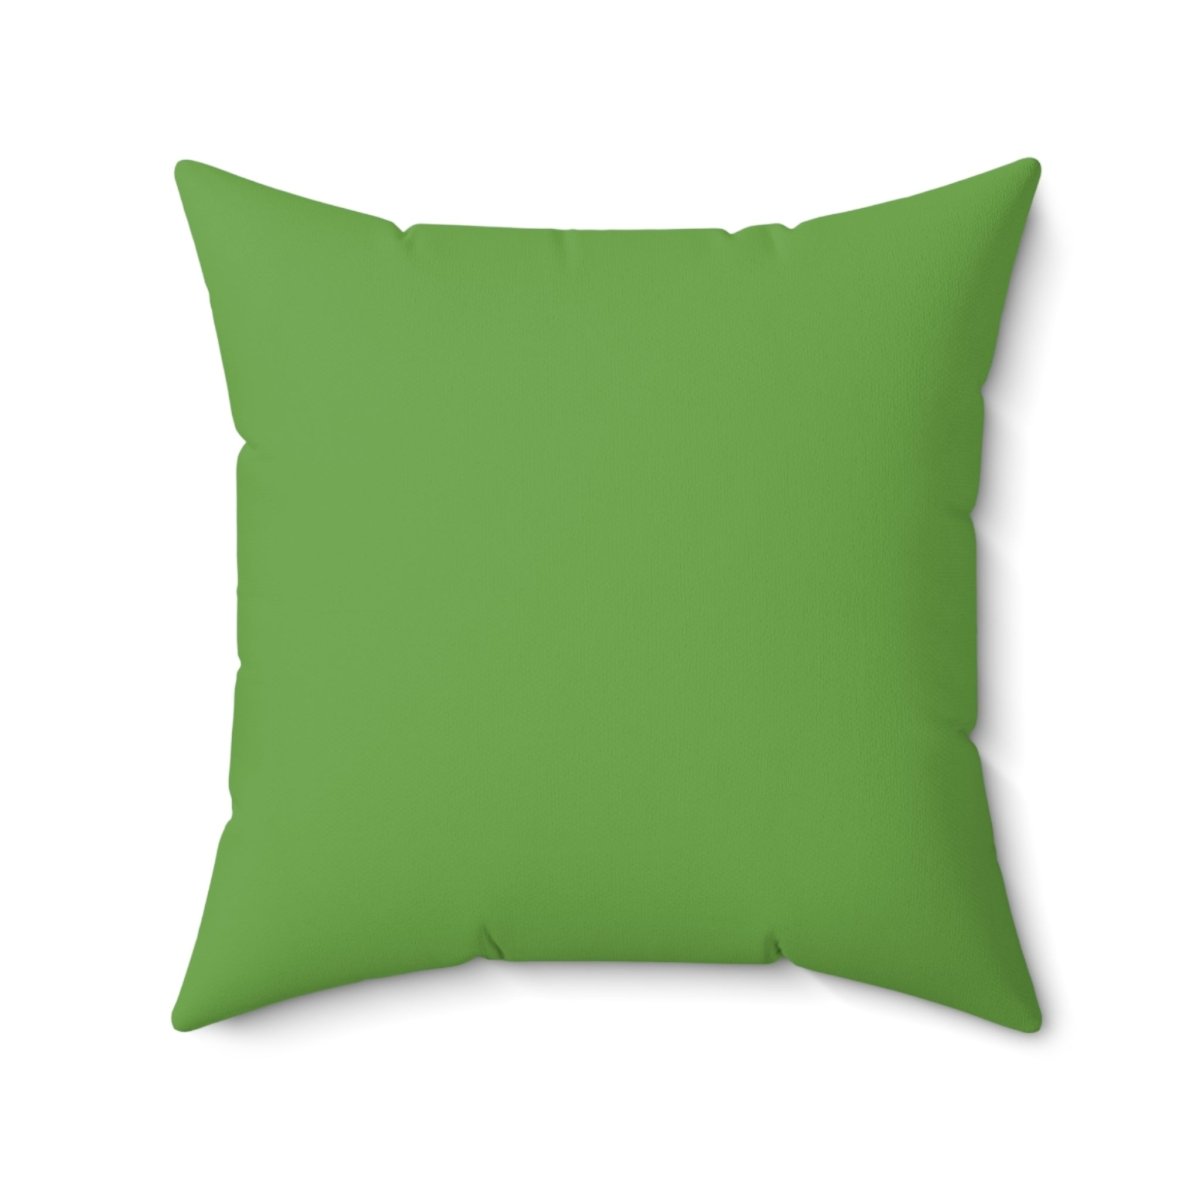 "Power to Get Wealth" Collection: Deuteronomy 8:18 Spun Polyester Square Pillow - Plain Vision Brand